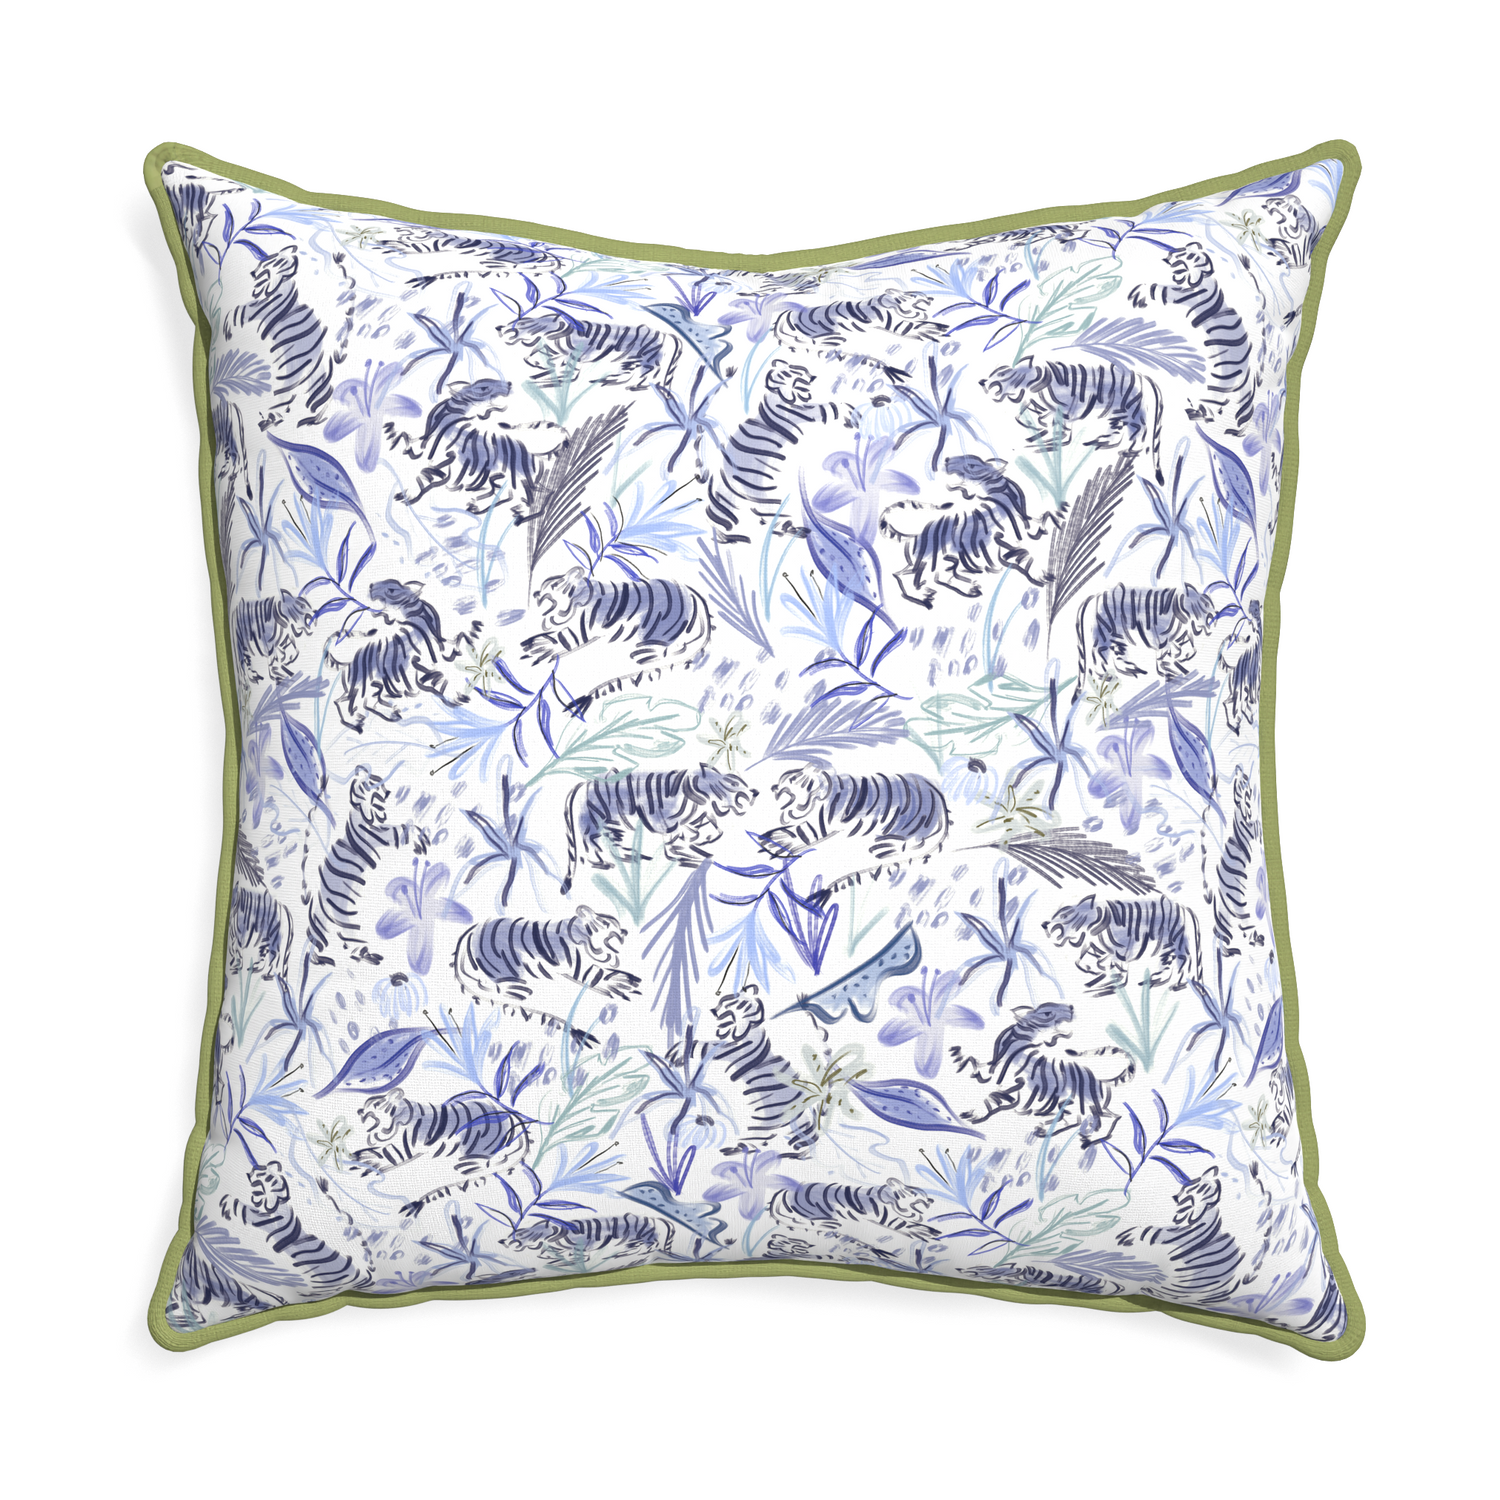 Euro-sham frida blue custom blue with intricate tiger designpillow with moss piping on white background